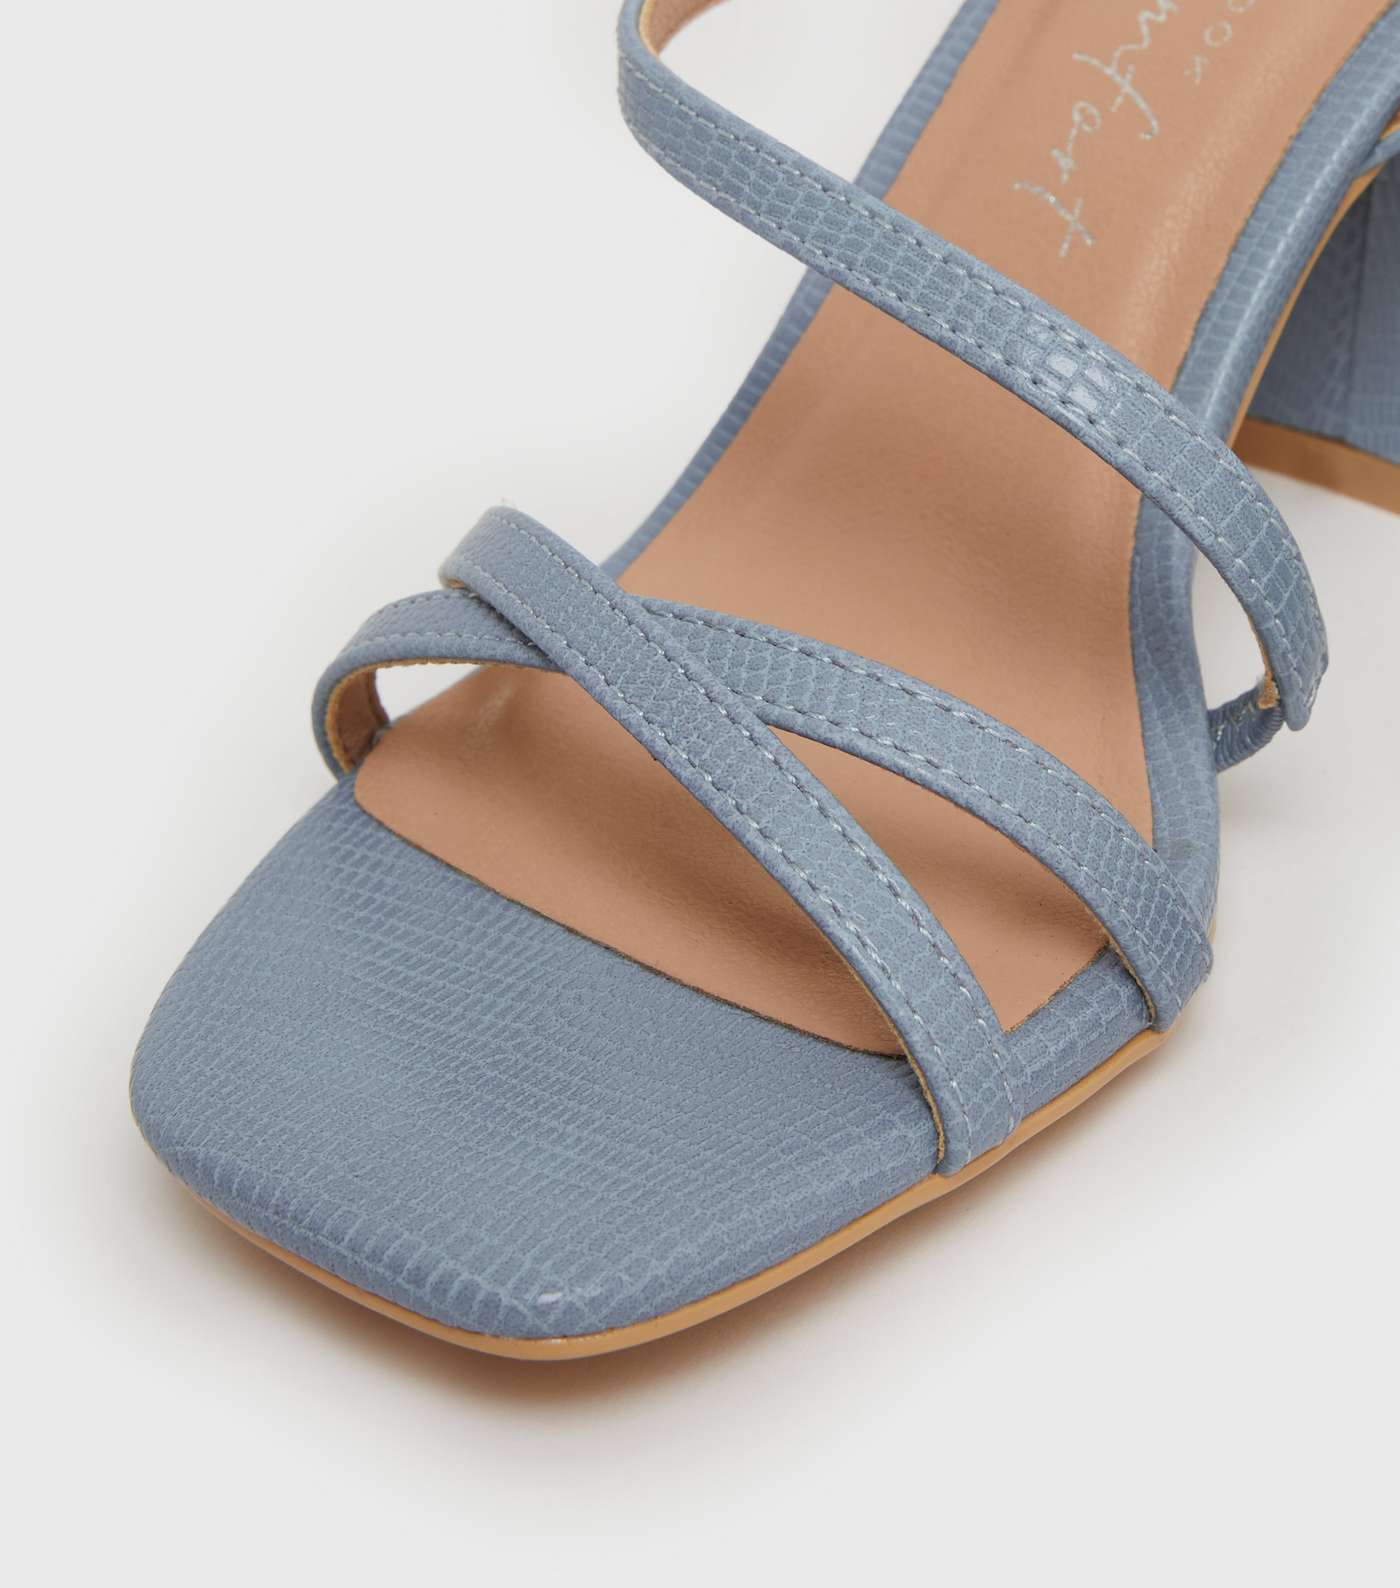 Pale Blue Faux Croc Strappy Flared Block Heel Sandals Image 4